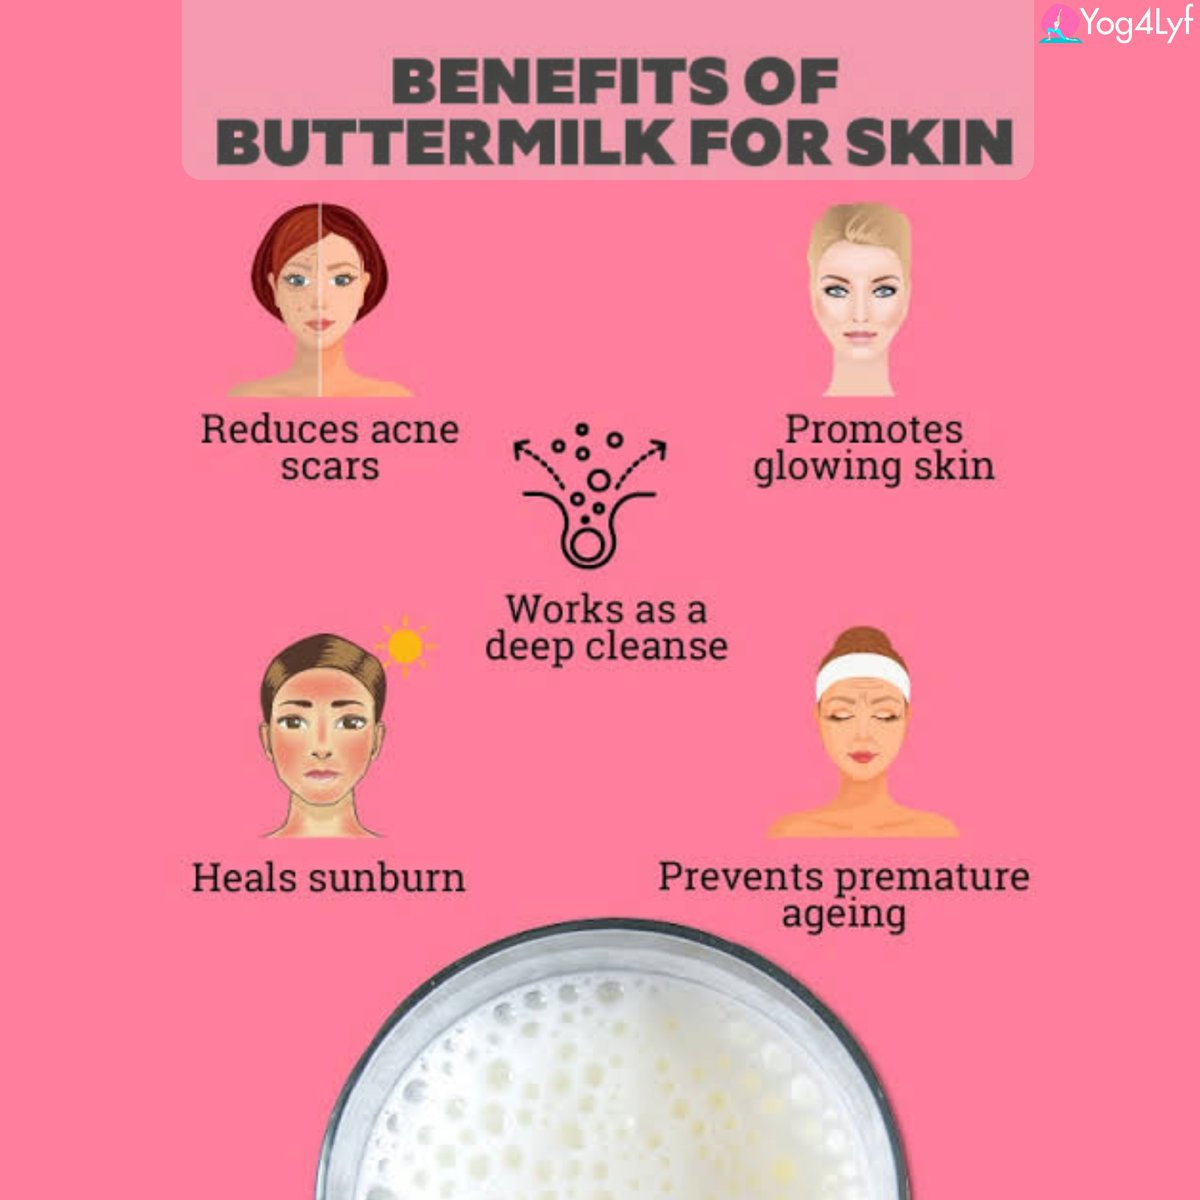 Buttermilk are a perfect for summers and your skin as well!
_________________________
#yog4lyf #yogaeverywhereigo  #yogalife  #healthyfood  #healthylifestyle  #milkbenefits  #buttermilk 
#skincare #exploremore